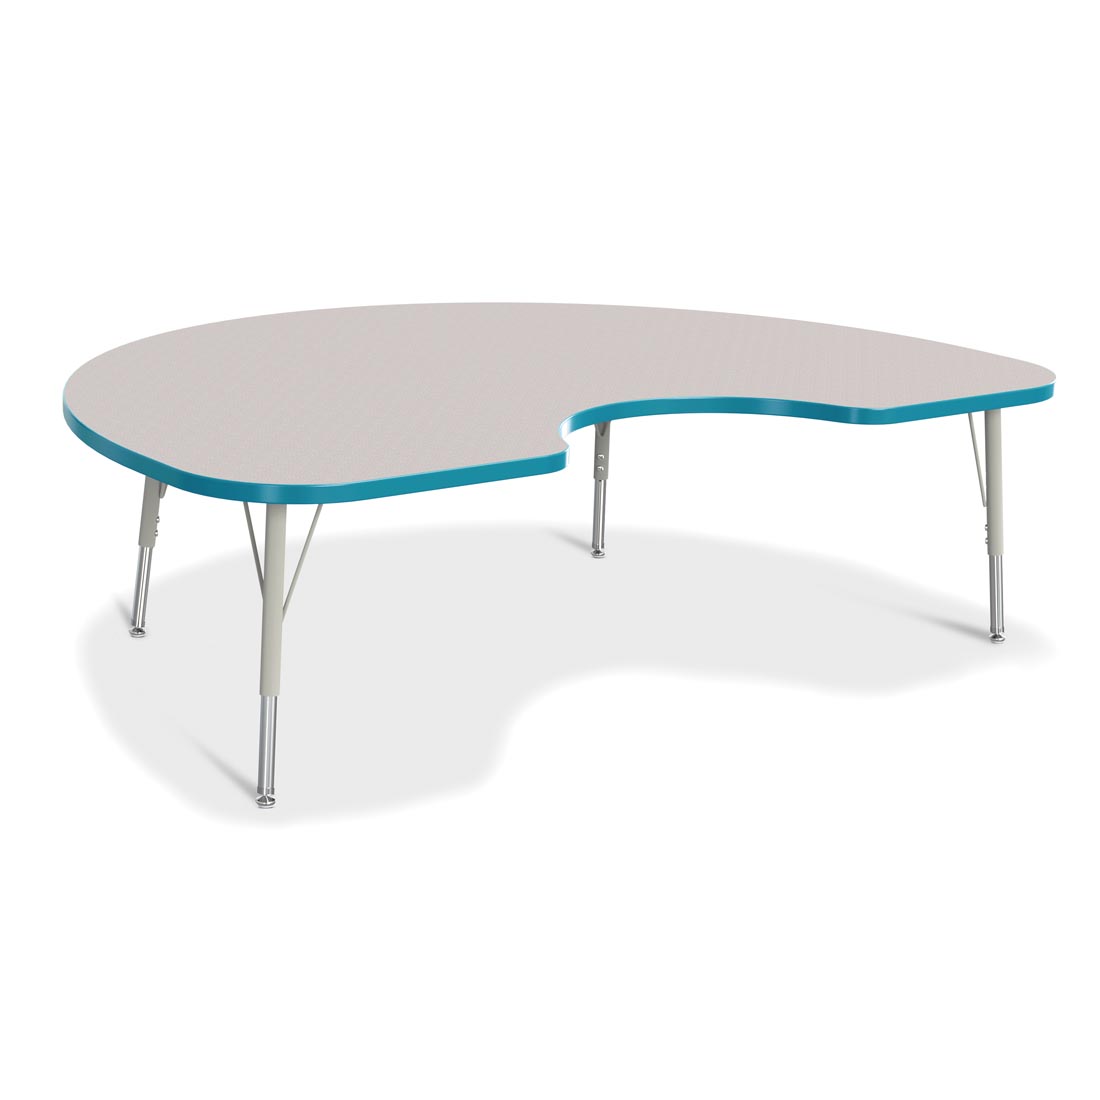 Berries Kidney Activity Table Elementary Height Gray With Teal Edge